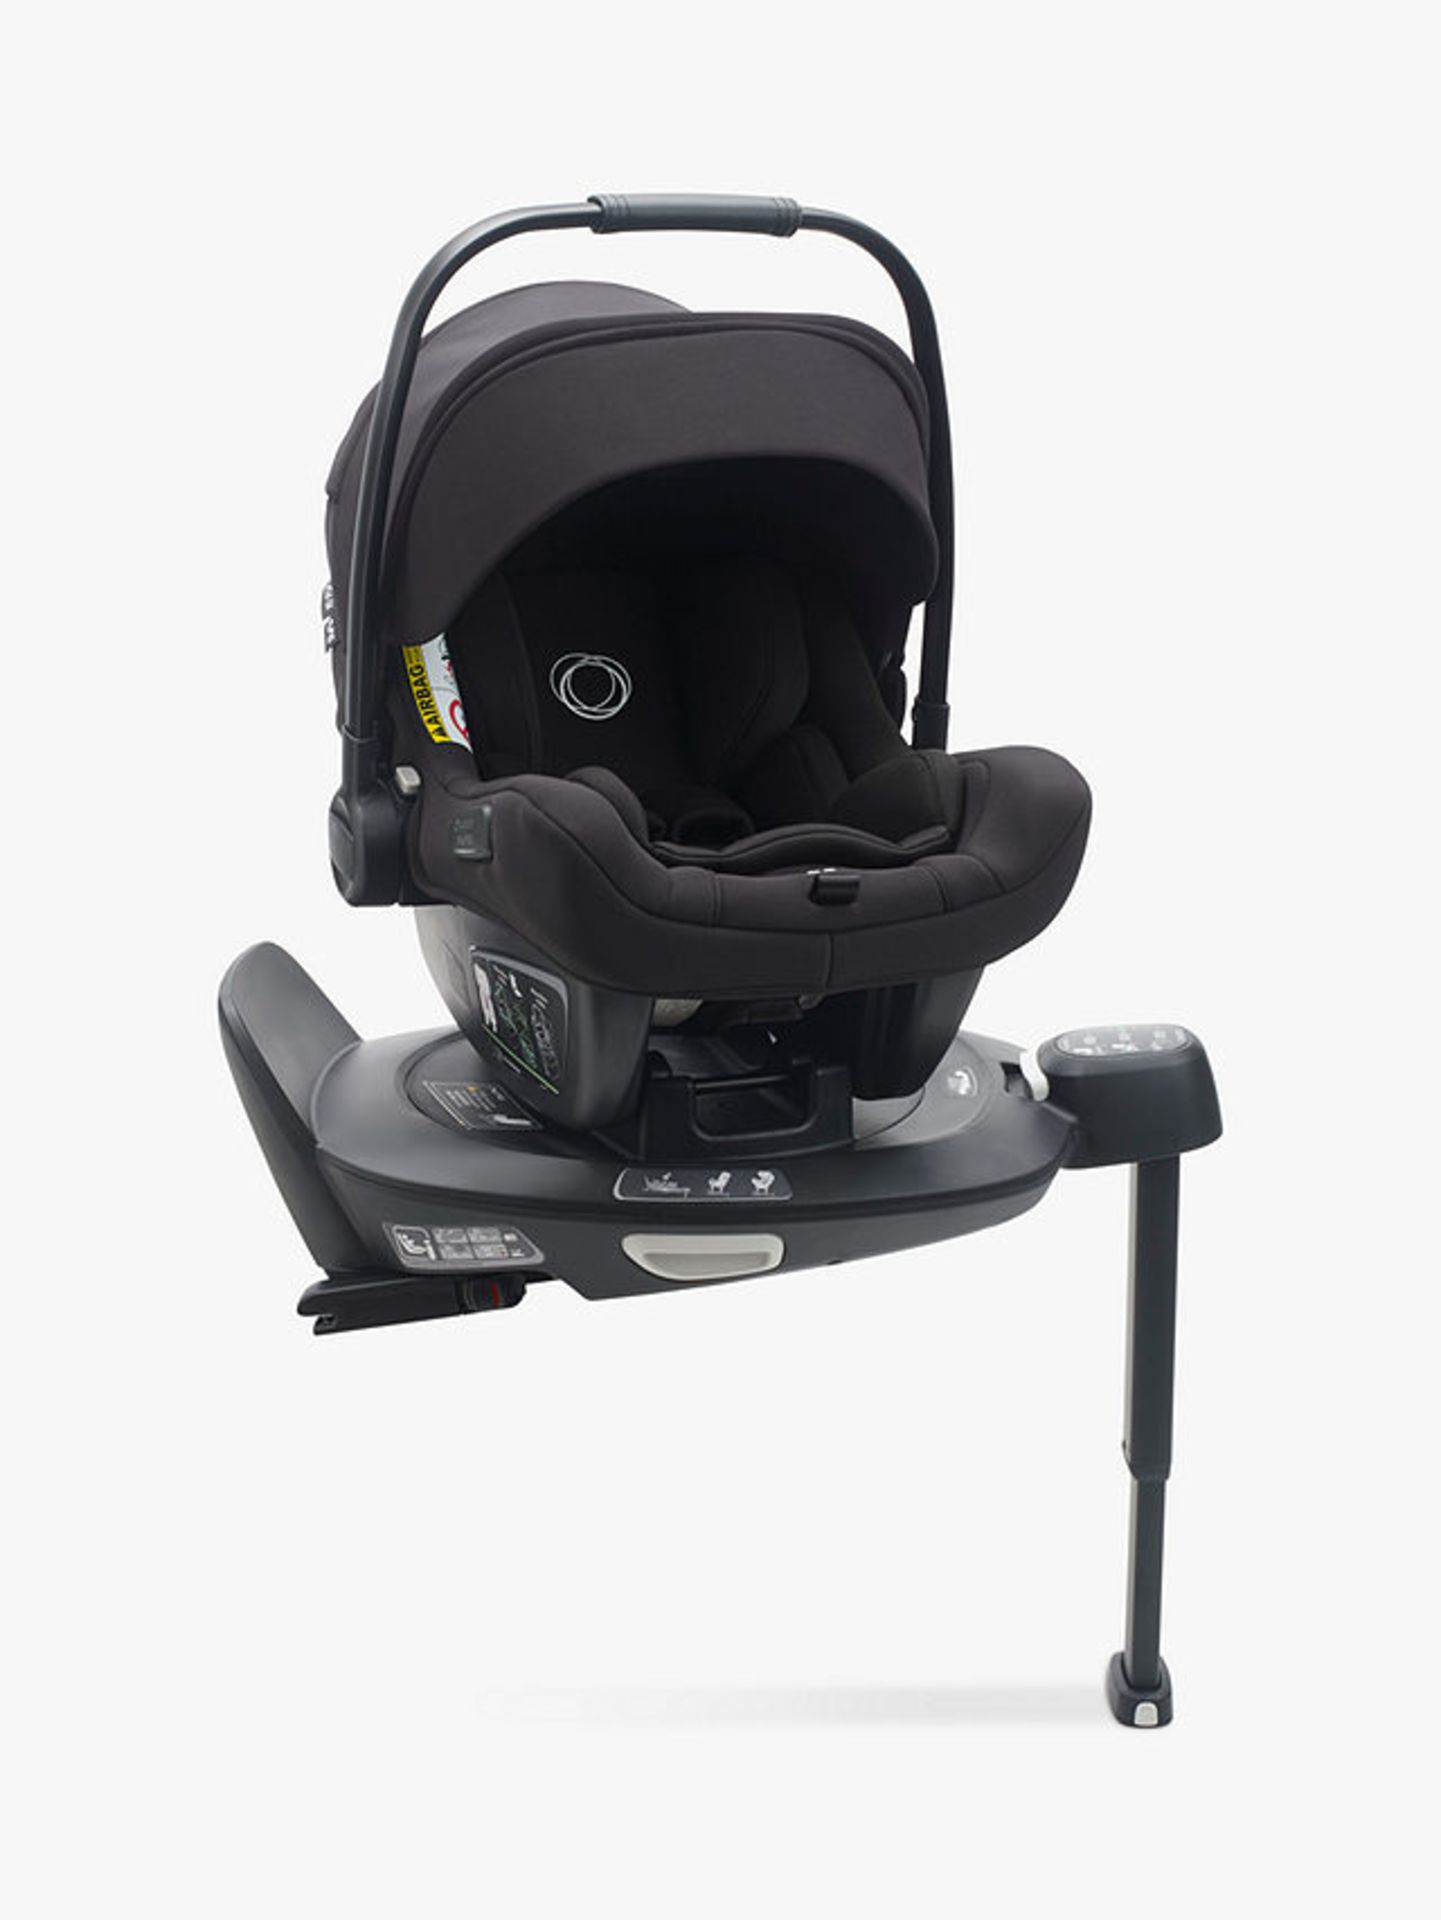 A1 PRODUCT NEW -   BUGABOO TURTLE AIR BY NUNA CAR SEAT IN BLACK - RRP Â£209 - Image 5 of 7